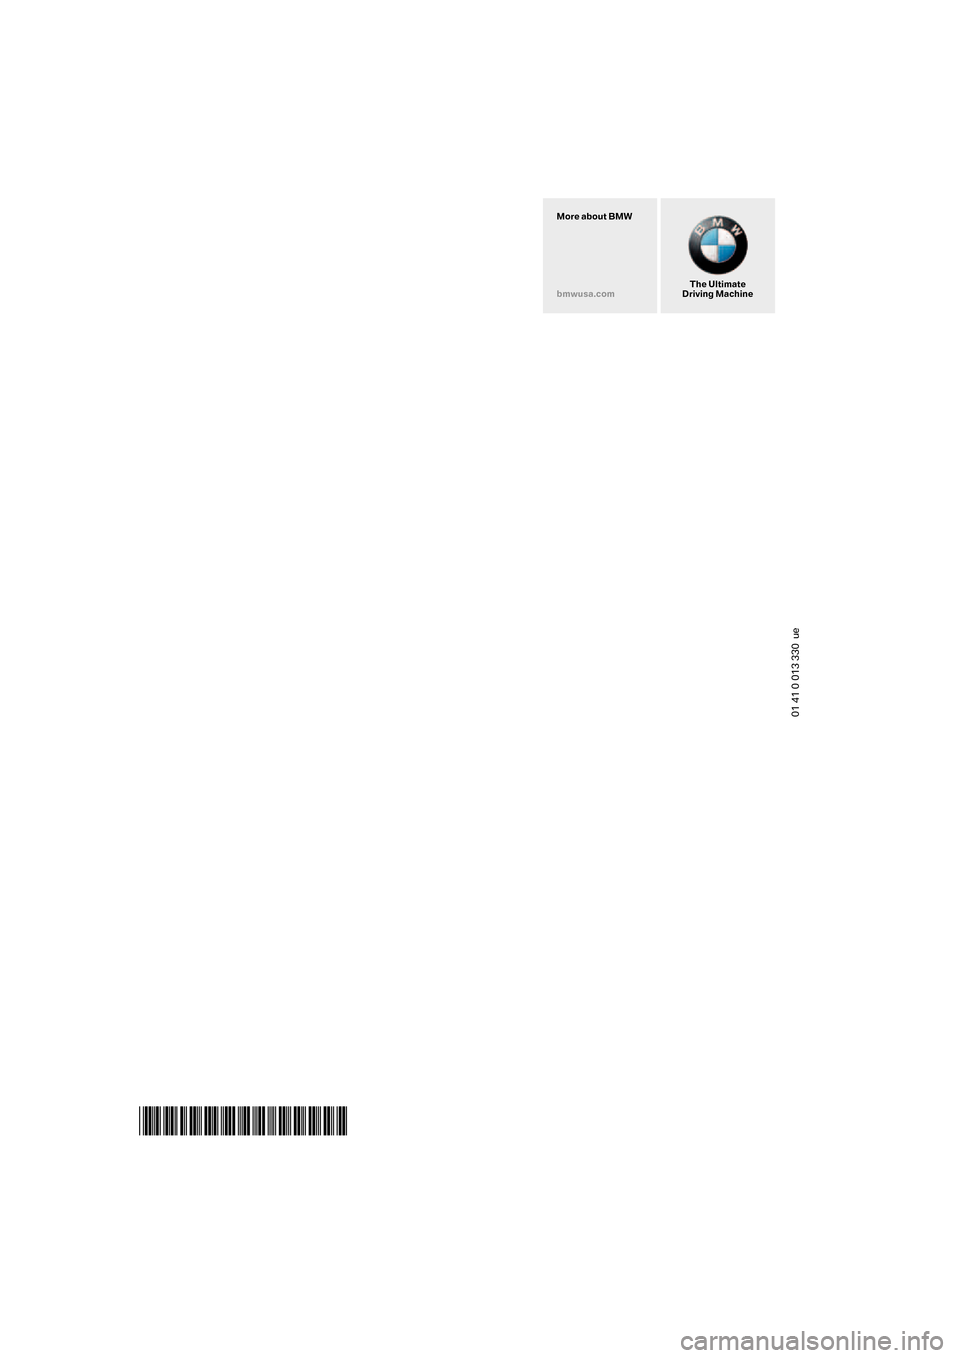 BMW Z4M COUPE 2007 E86 Service Manual 01 41 0 013 330  ue
*BL0013330000*
The Ultimate
Driving Machine More about BMW
bmwusa.com
ba5.book  Seite 48  Mittwoch, 28. Februar 2007  1:09 13 